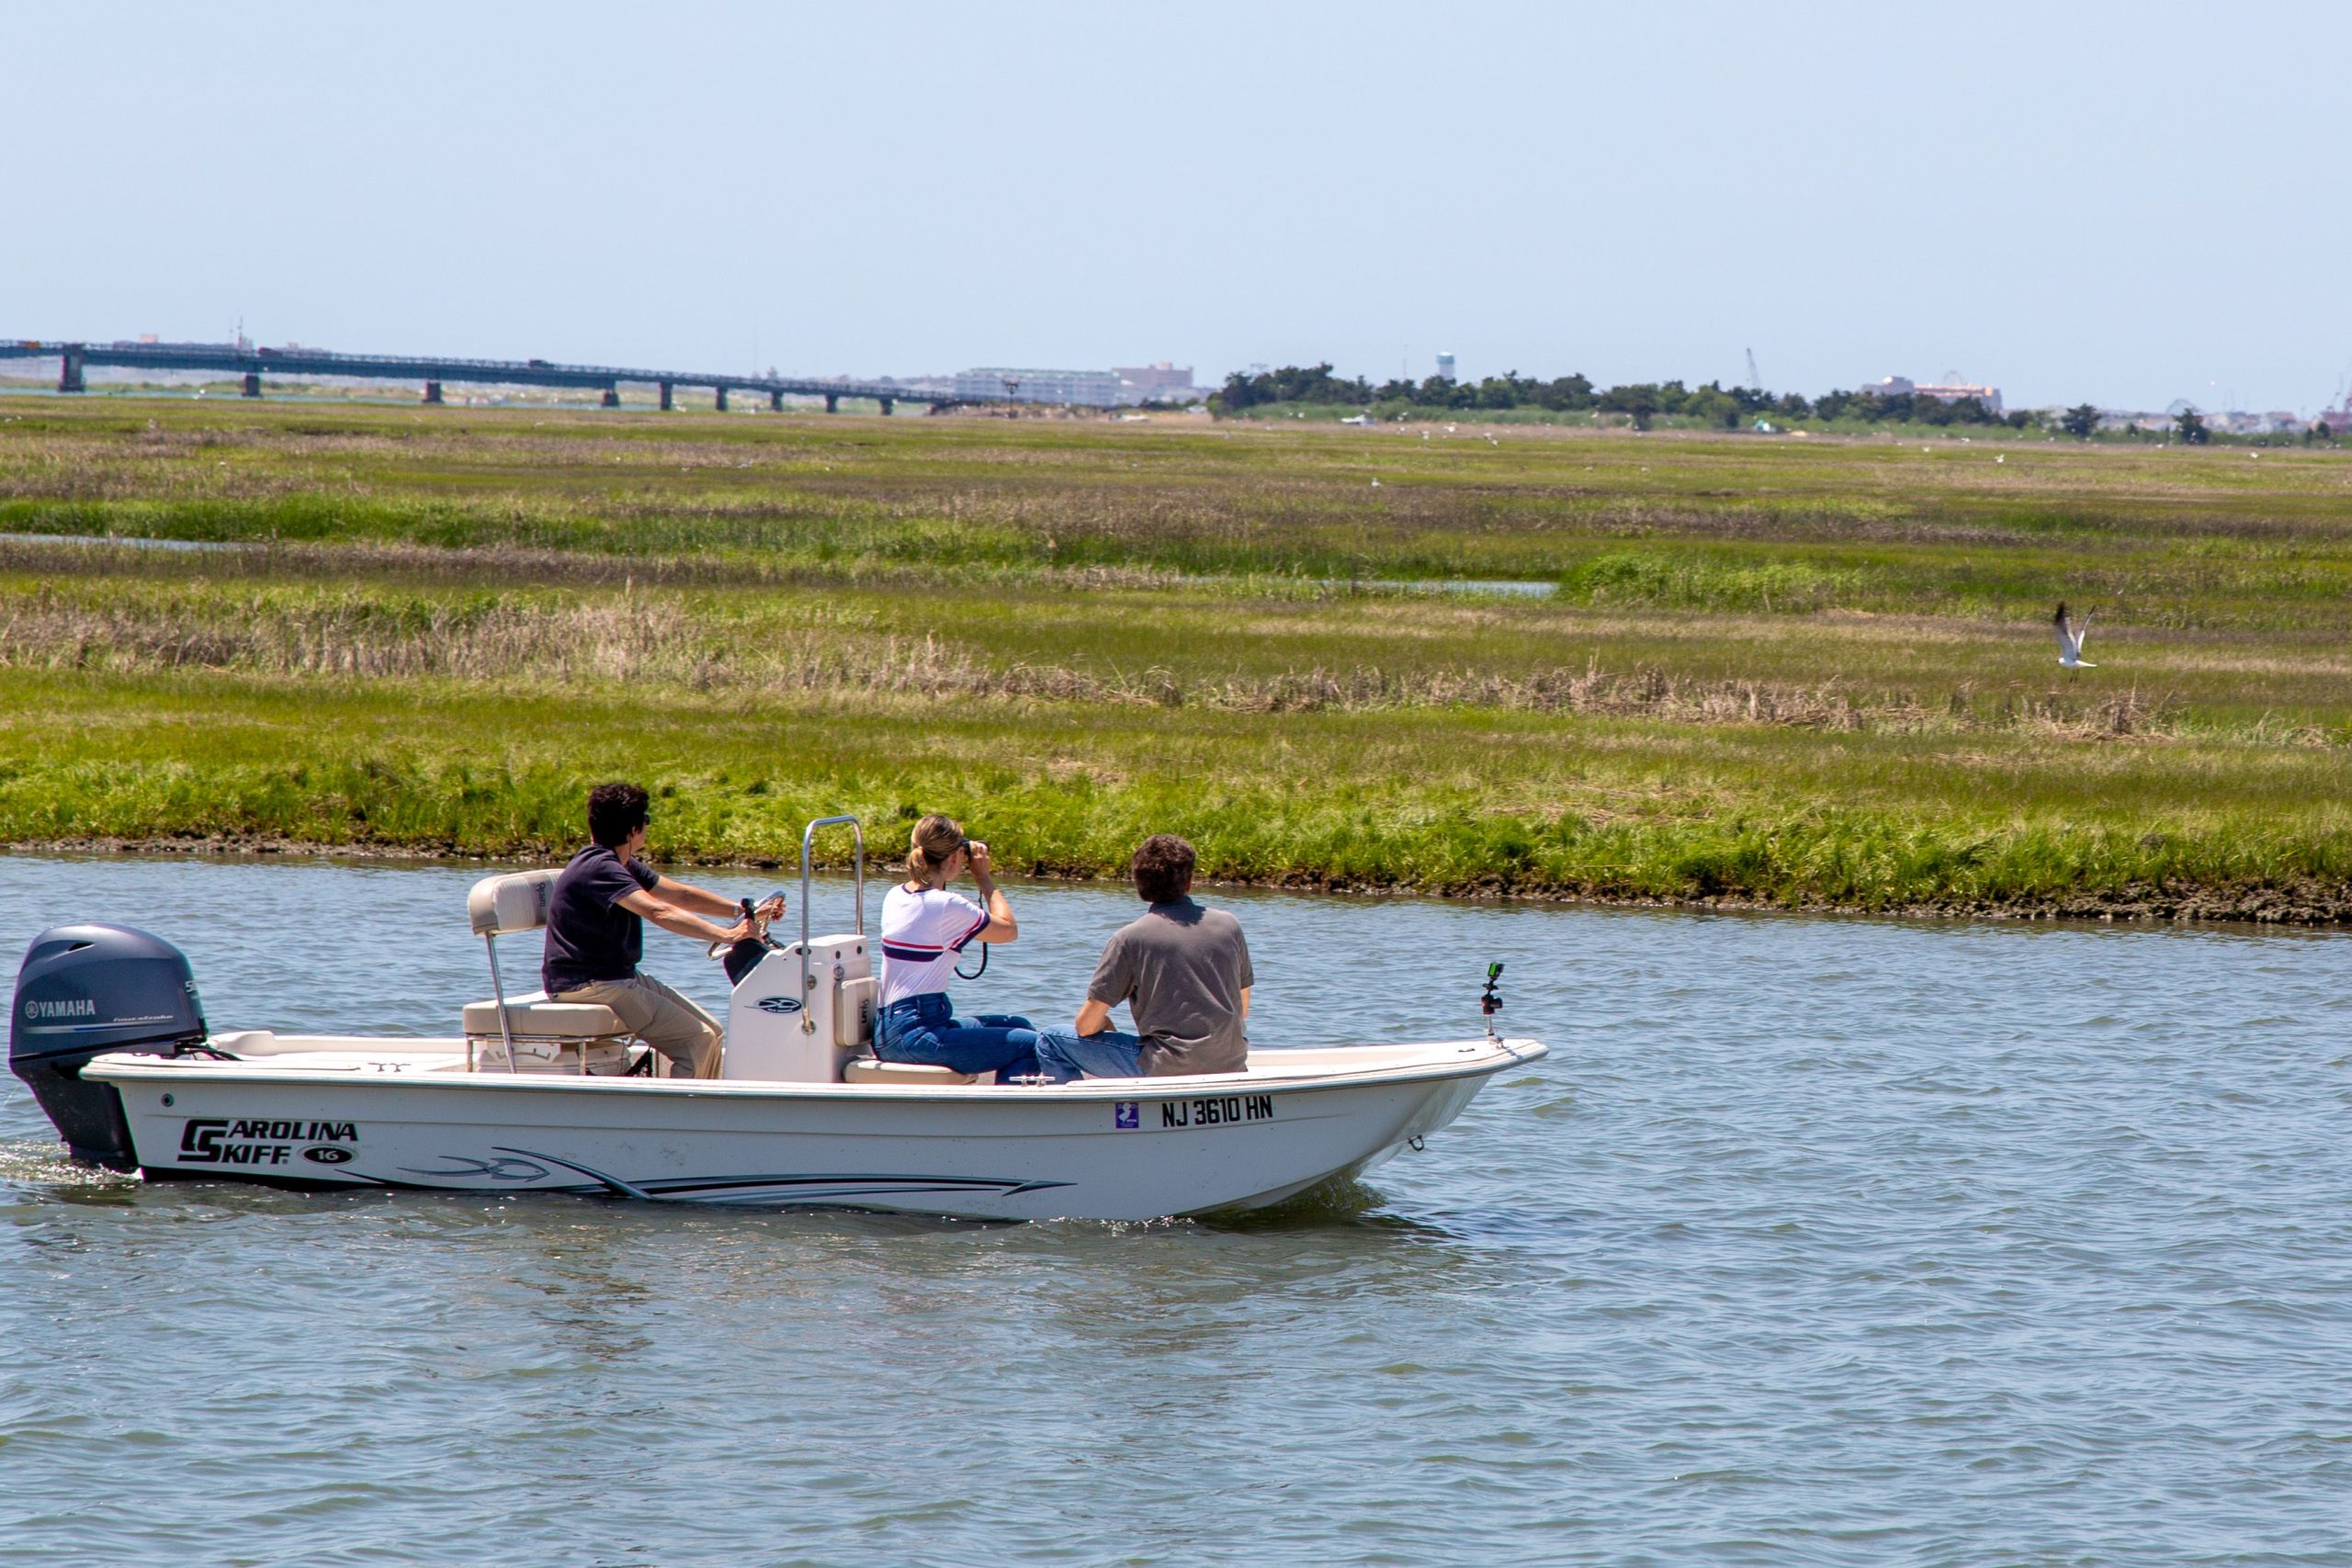 Samantha visits Salt Marshes at the Wetland Institute at the Jersey Shore